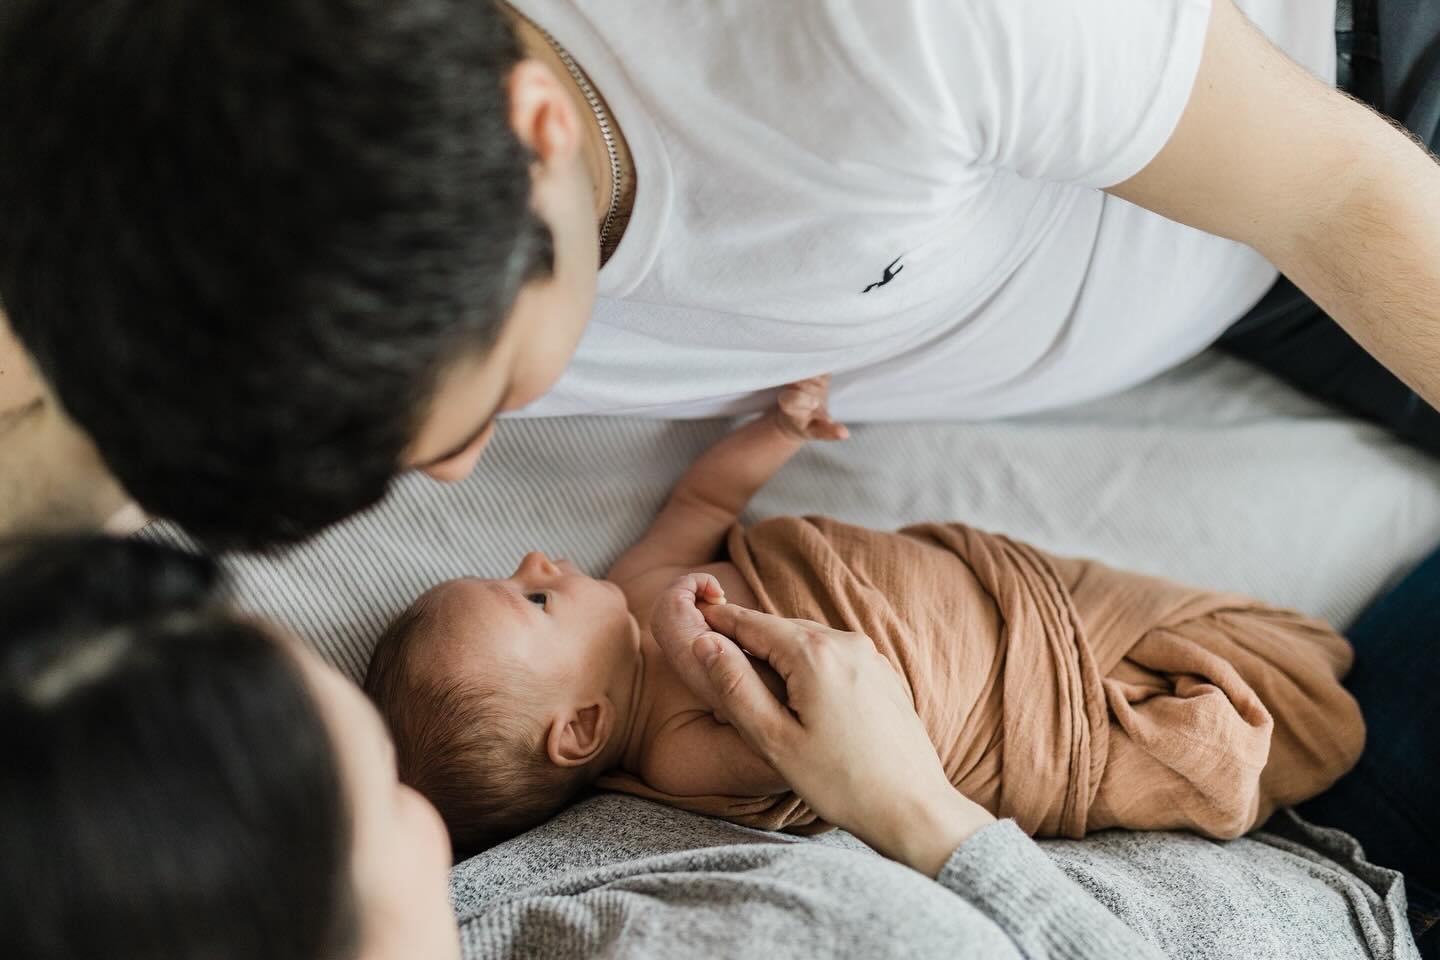 As a newborn photographer, I understand how it can be stressful to leave the house those first few weeks, which is why I offer the convenience of coming to your home. There&rsquo;s no need for elaborate makeup, a perfectly tidy home, or a ton of prop